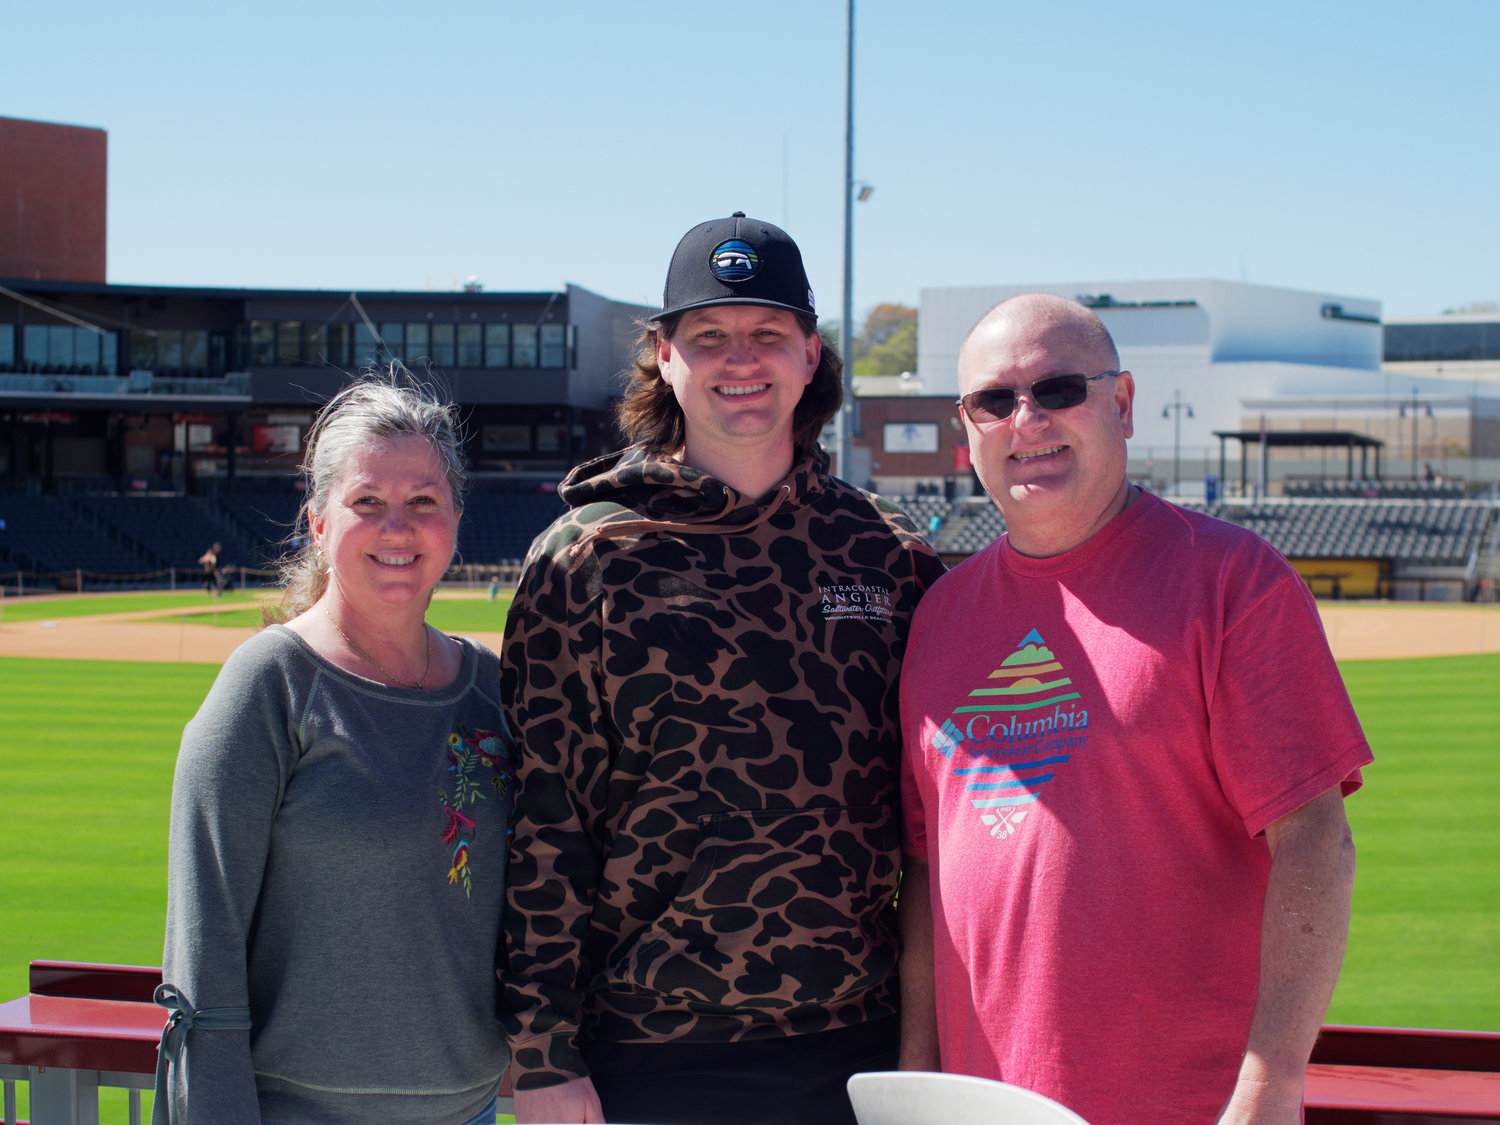 Michelle Gregory, Clint Gregory and Travis Gregory enjoy Spring Fling at Segra Stadium on March 4, 2023.